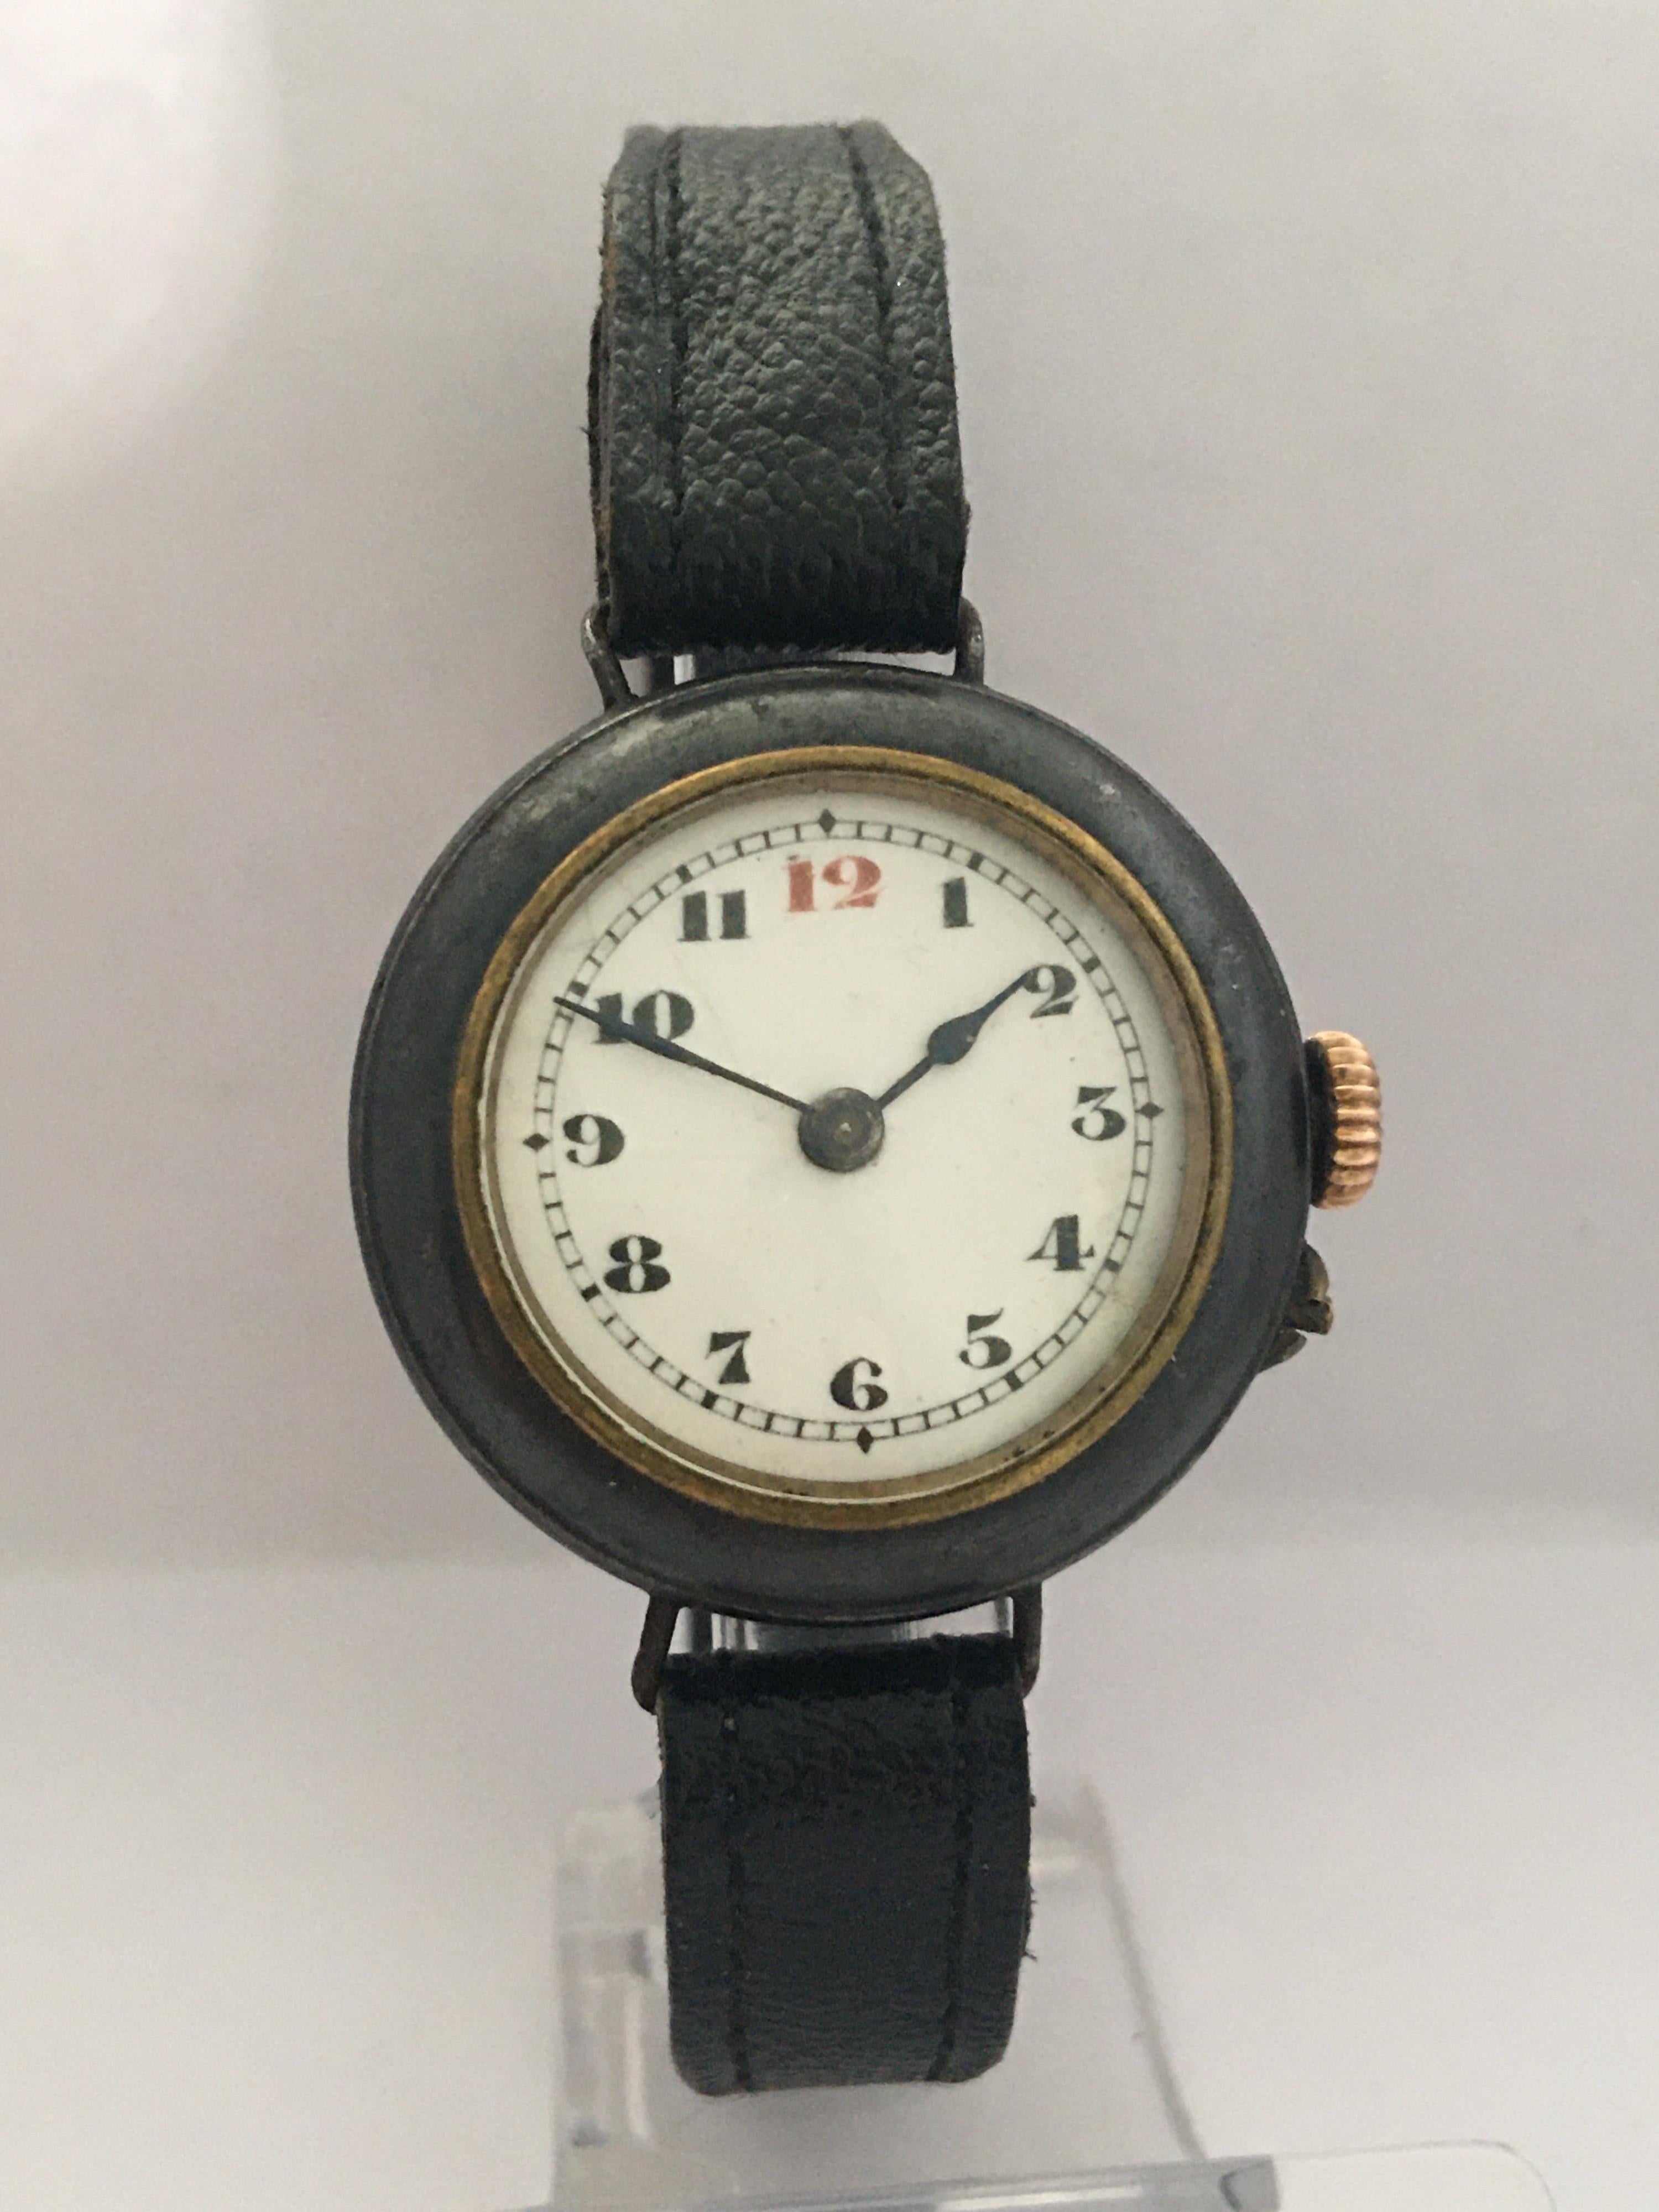 This beautiful antique 31mm diameter (excluding crown)hand winding watch is in good working condition and it is ticking well. It has recently been serviced. Visible signs of ageing and wear with some tarnished on the watch case as shown. 

Please